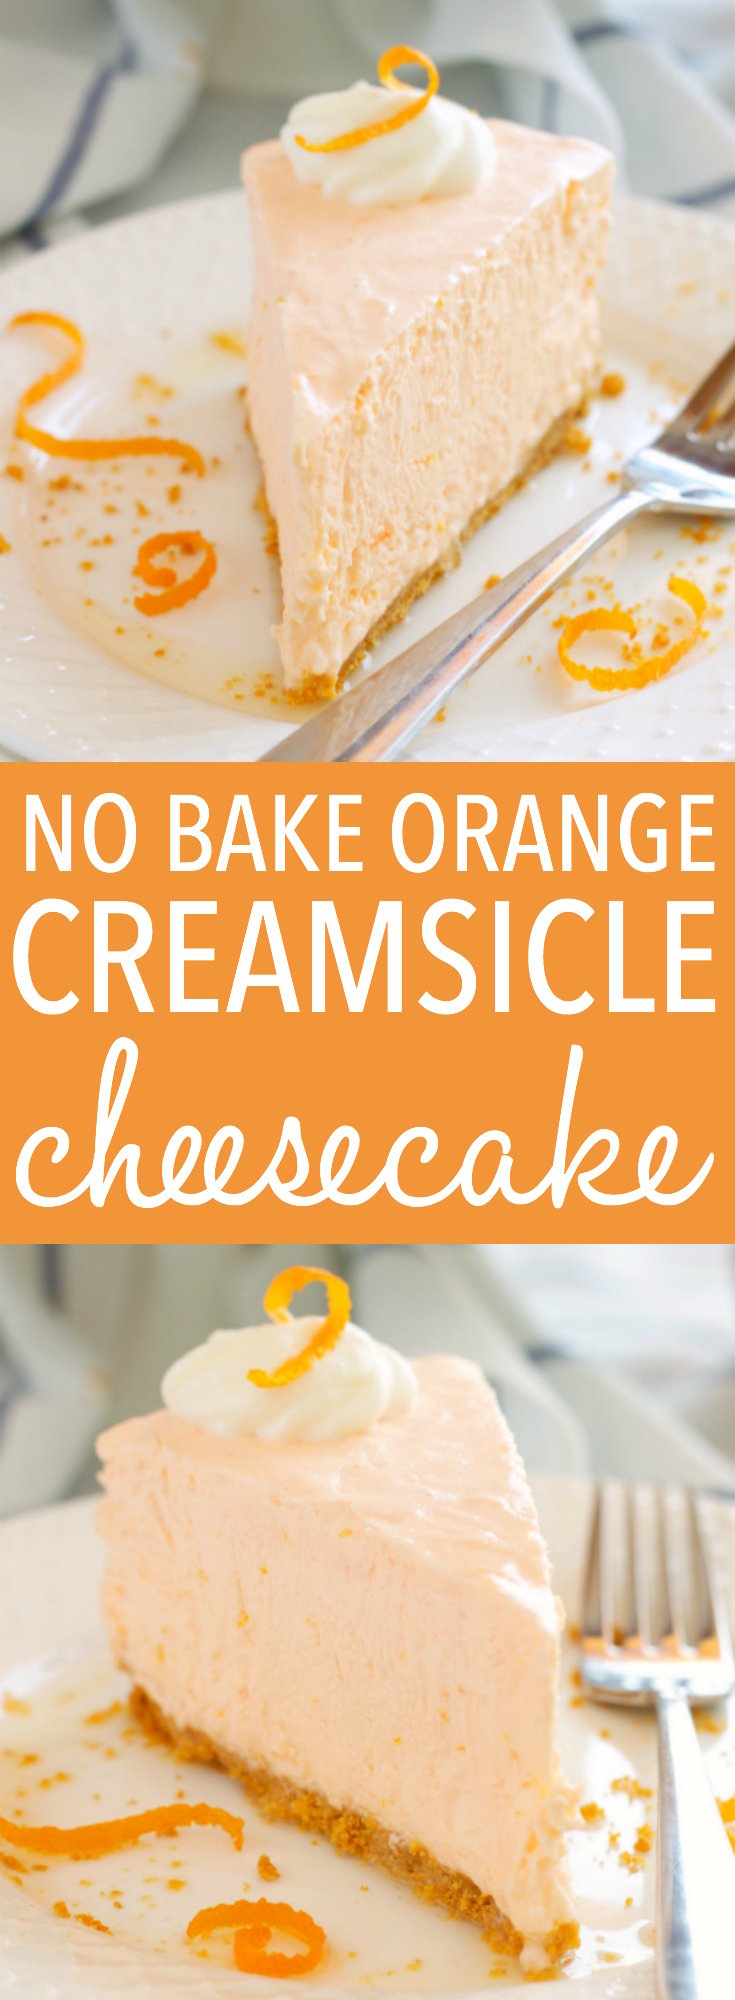 This No Bake Orange Creamsicle Cheesecake is a creamy, easy to make, no bake dessert with a sweet orange flavor, inspired by a delicious summer treat! Recipe from thebusybaker.ca! via @busybakerblog